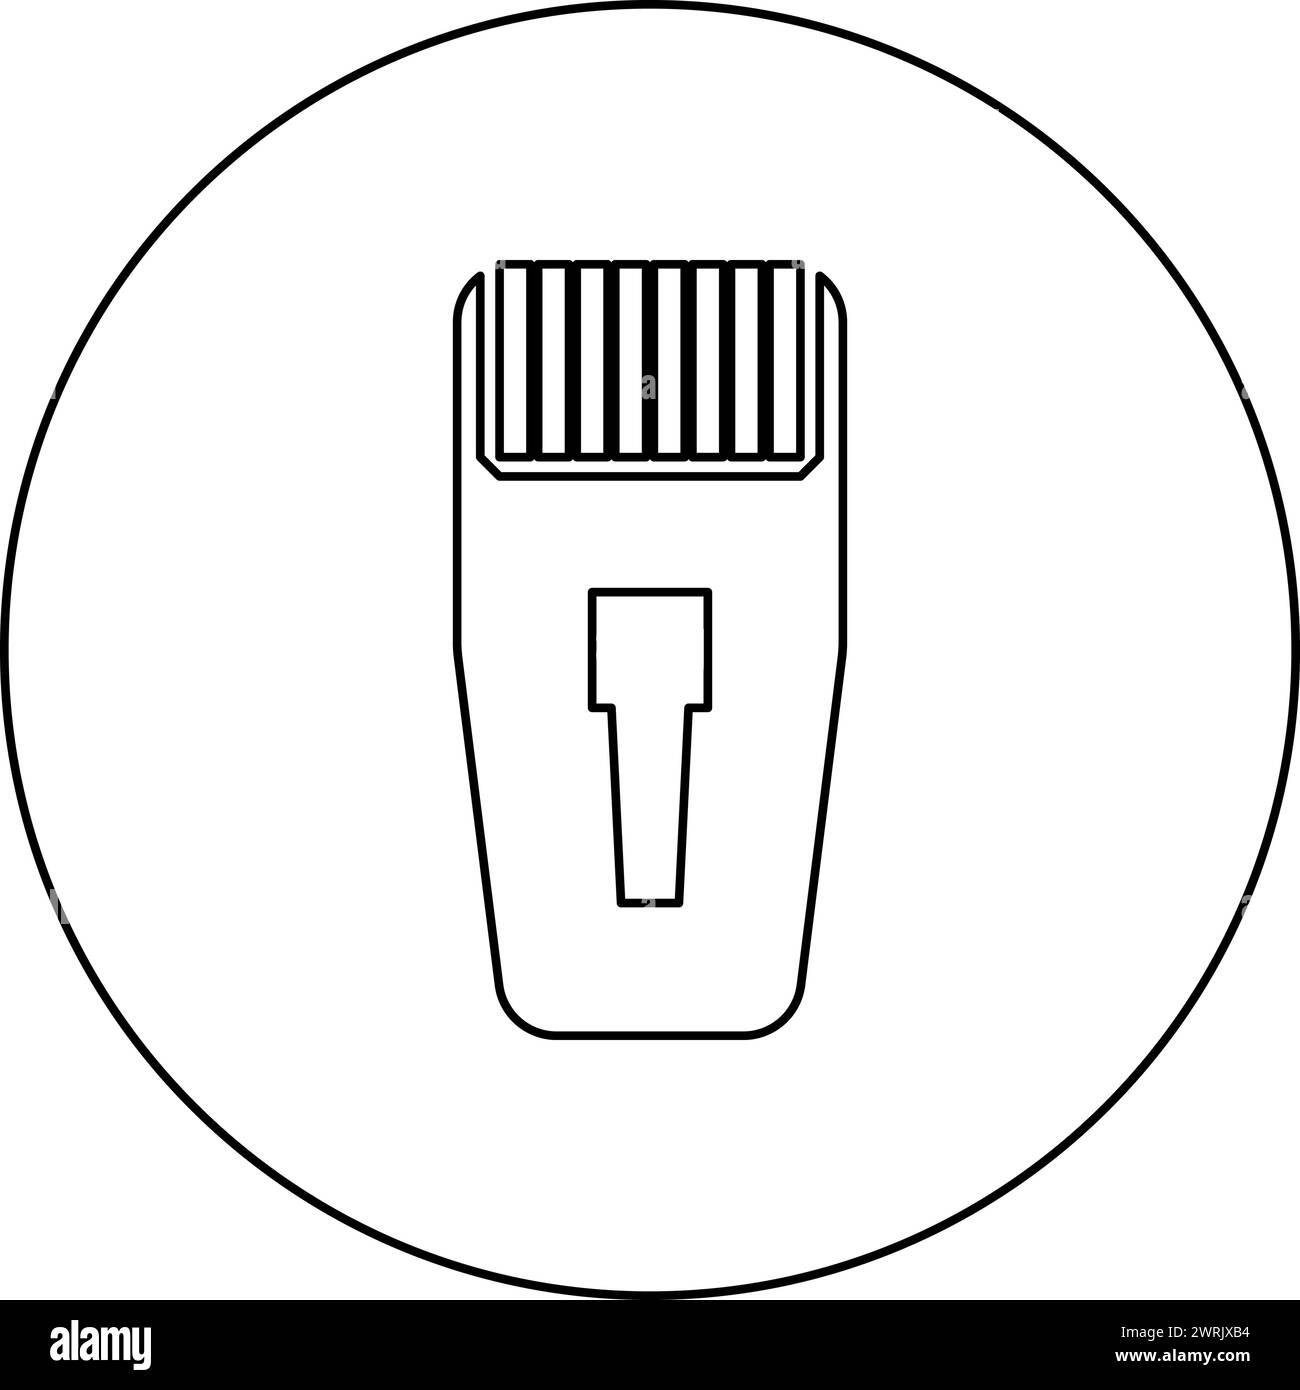 Connector RJ-45 connecter ethernet rj45 internet icon in circle round black color vector illustration image outline contour line thin style simple Stock Vector